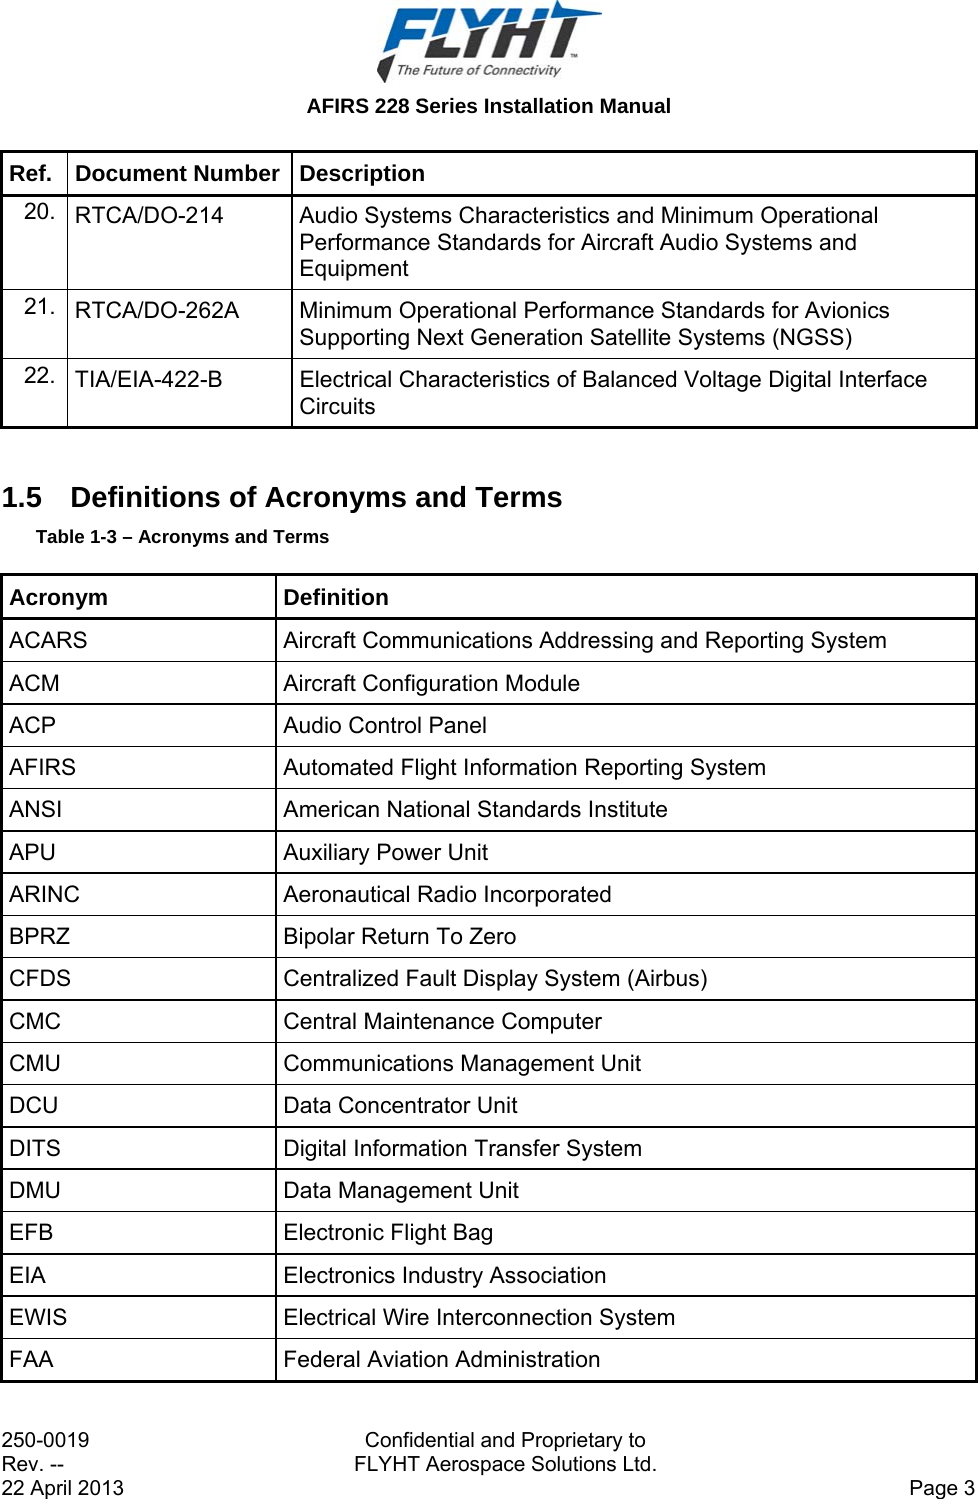  AFIRS 228 Series Installation Manual 250-0019  Confidential and Proprietary to Rev. --  FLYHT Aerospace Solutions Ltd. 22 April 2013    Page 3 Ref. Document Number Description 20.  RTCA/DO-214  Audio Systems Characteristics and Minimum Operational Performance Standards for Aircraft Audio Systems and Equipment 21.  RTCA/DO-262A  Minimum Operational Performance Standards for Avionics Supporting Next Generation Satellite Systems (NGSS) 22.  TIA/EIA-422-B  Electrical Characteristics of Balanced Voltage Digital Interface Circuits  1.5  Definitions of Acronyms and Terms Table 1-3 – Acronyms and Terms Acronym Definition ACARS  Aircraft Communications Addressing and Reporting System ACM  Aircraft Configuration Module ACP  Audio Control Panel AFIRS  Automated Flight Information Reporting System ANSI  American National Standards Institute APU  Auxiliary Power Unit ARINC  Aeronautical Radio Incorporated BPRZ  Bipolar Return To Zero CFDS  Centralized Fault Display System (Airbus) CMC  Central Maintenance Computer CMU  Communications Management Unit DCU  Data Concentrator Unit DITS  Digital Information Transfer System DMU  Data Management Unit EFB  Electronic Flight Bag EIA Electronics Industry Association EWIS  Electrical Wire Interconnection System FAA  Federal Aviation Administration 